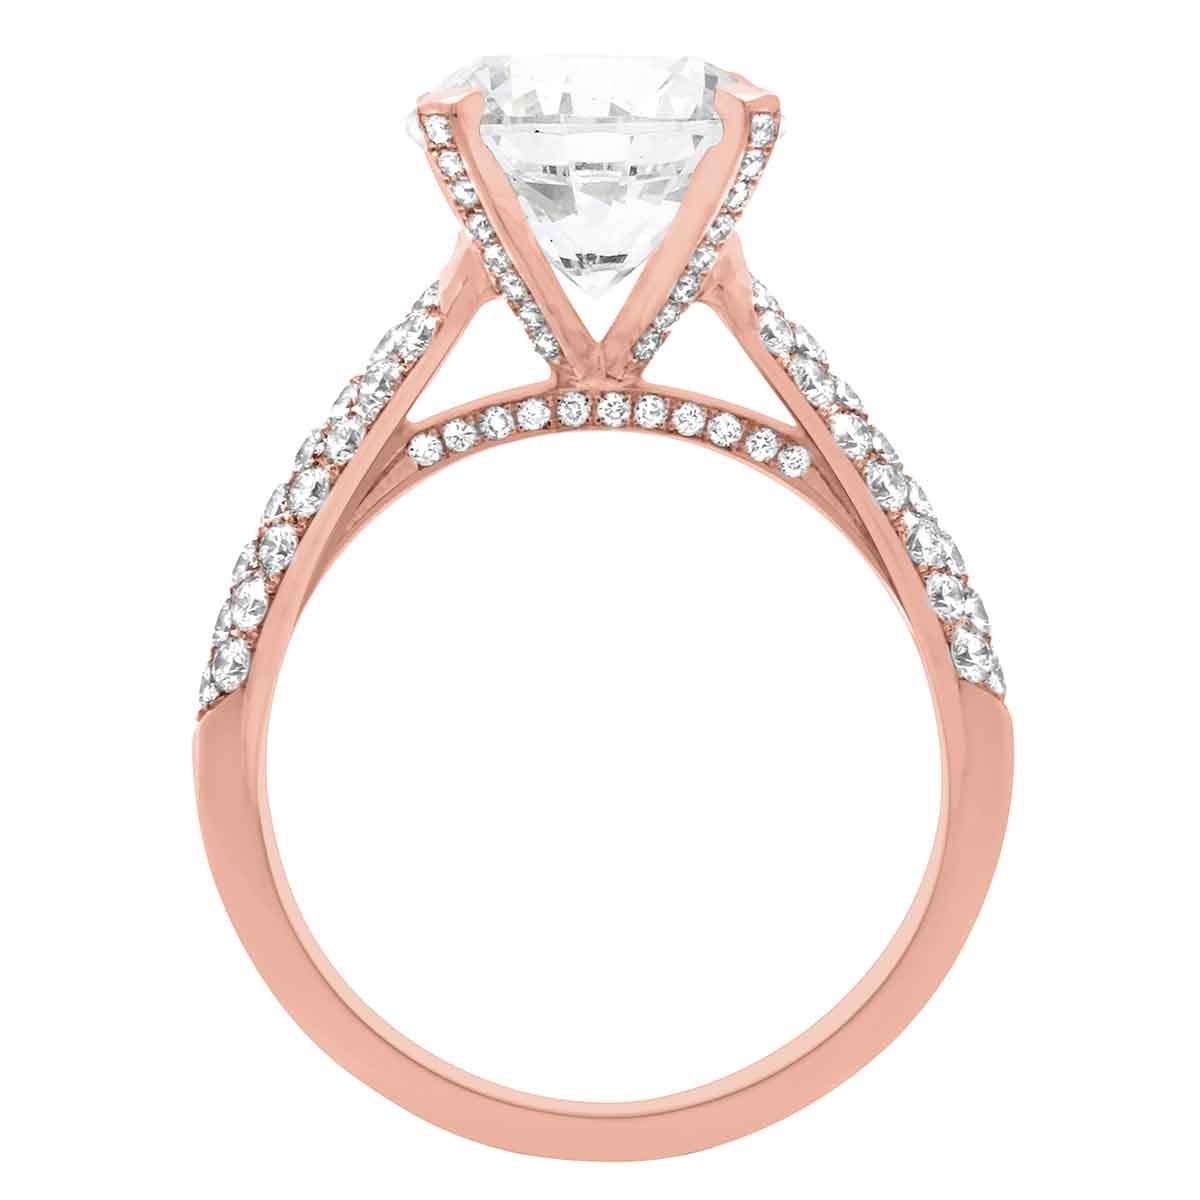 Bespoke Diamond Ring made from rose gold pictured in a upright position